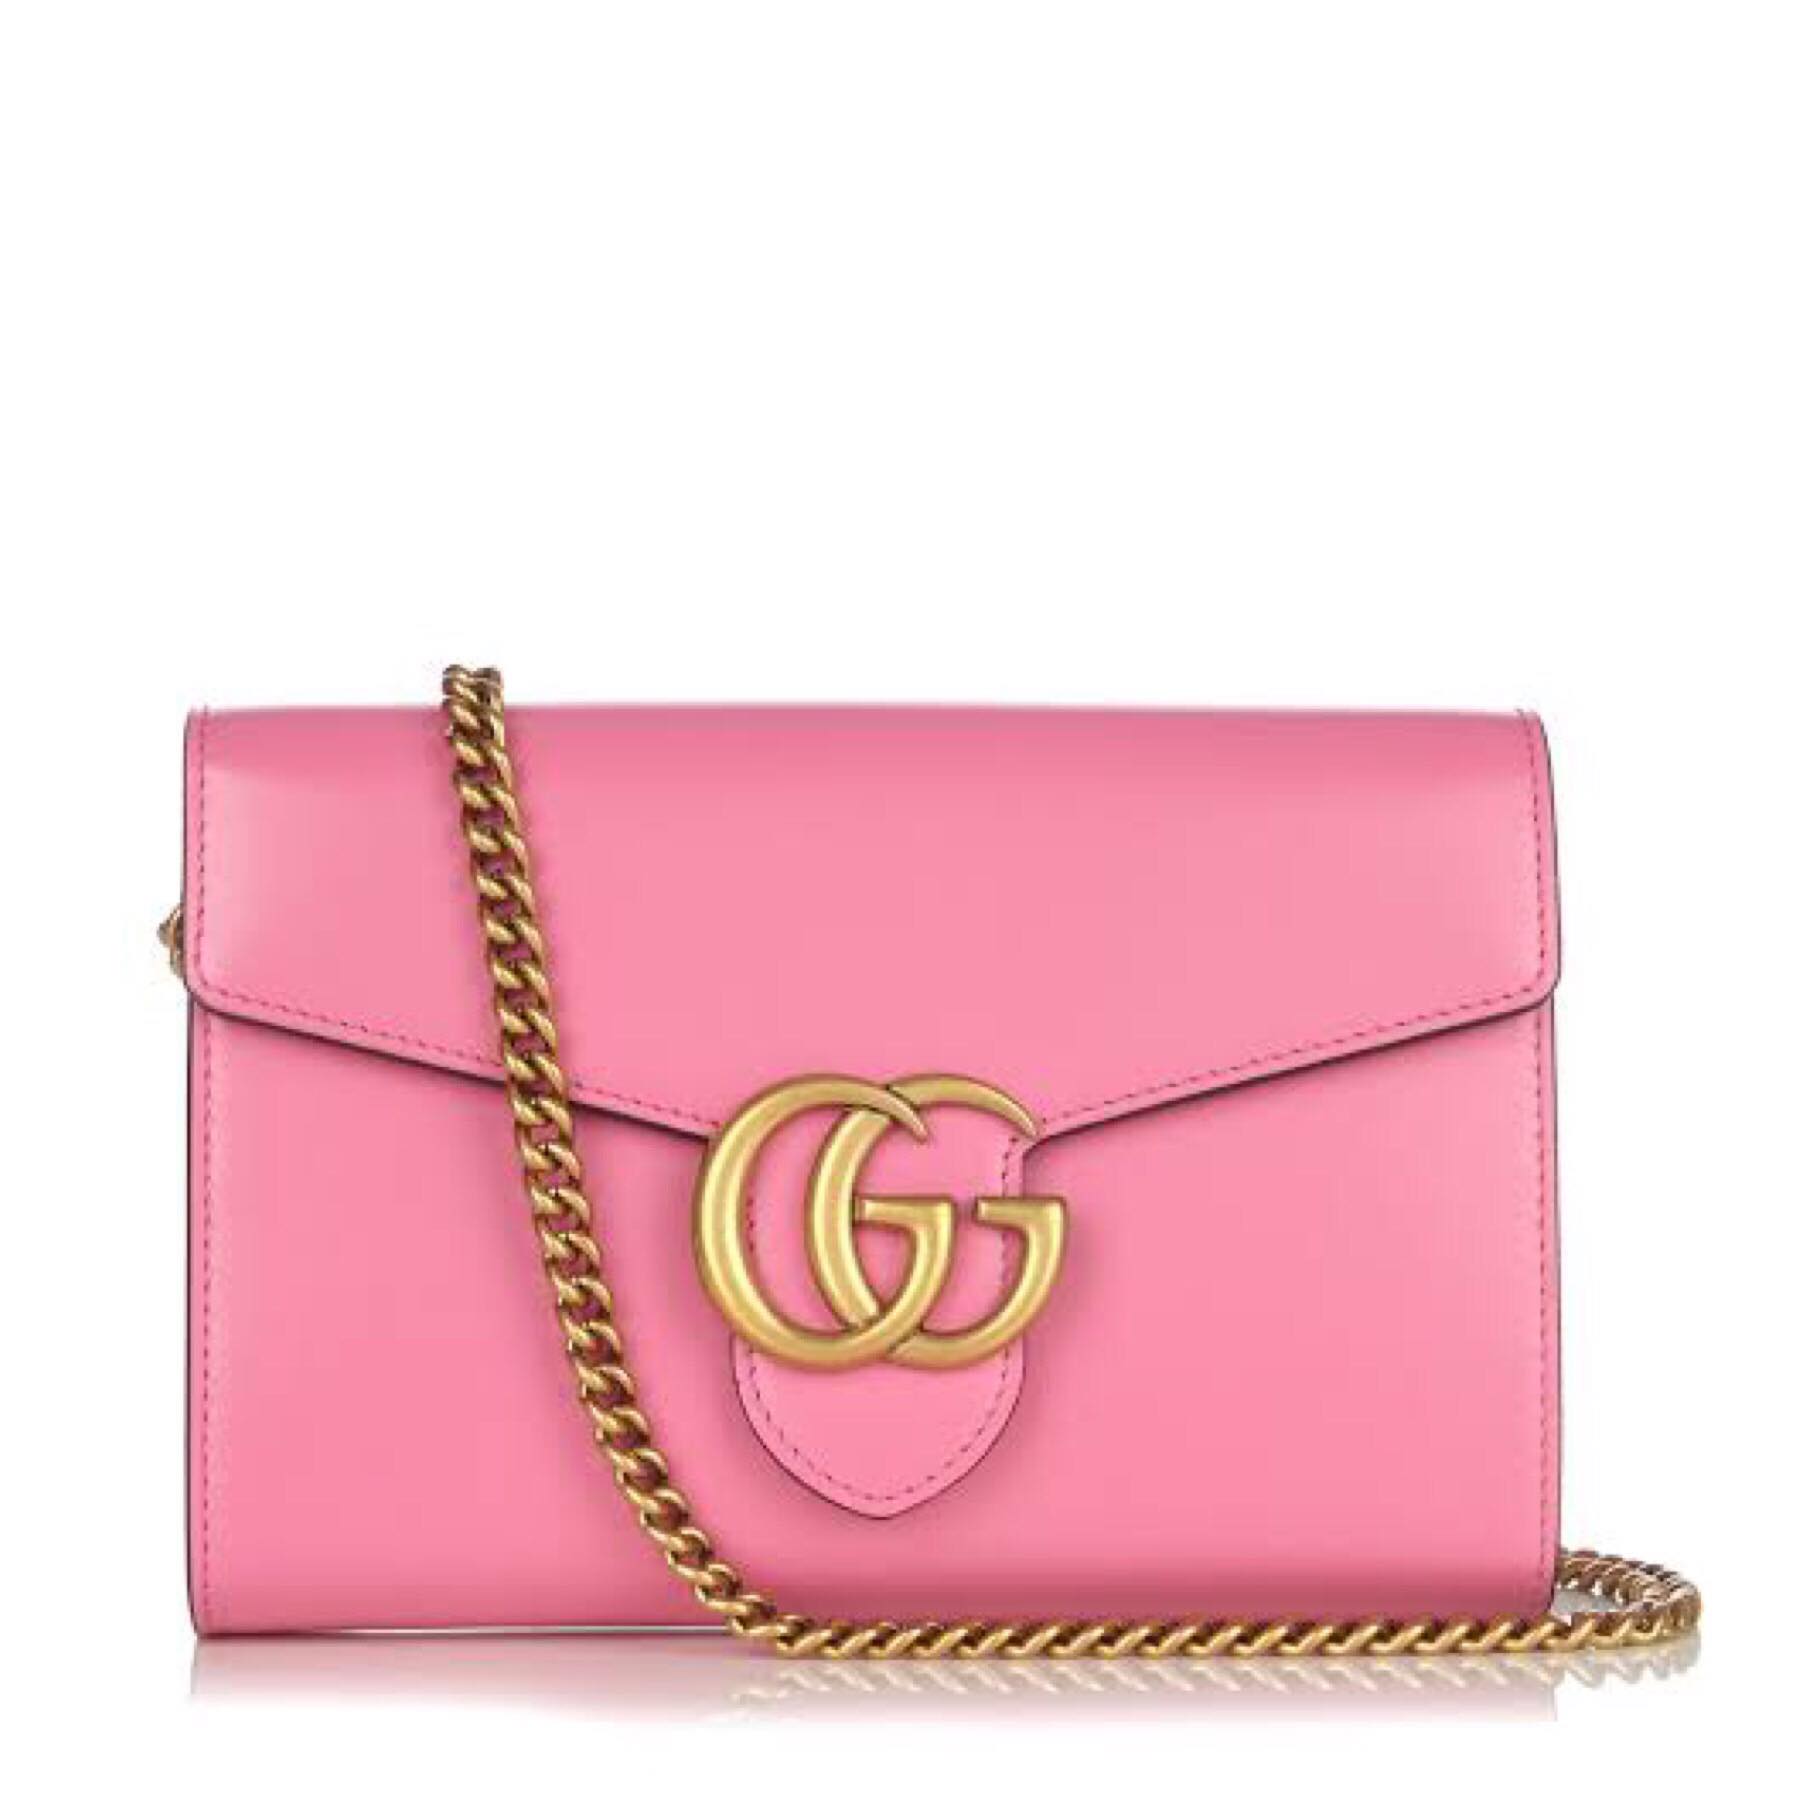 GUCCI Marmont Wallet Chain Bag - Pink 